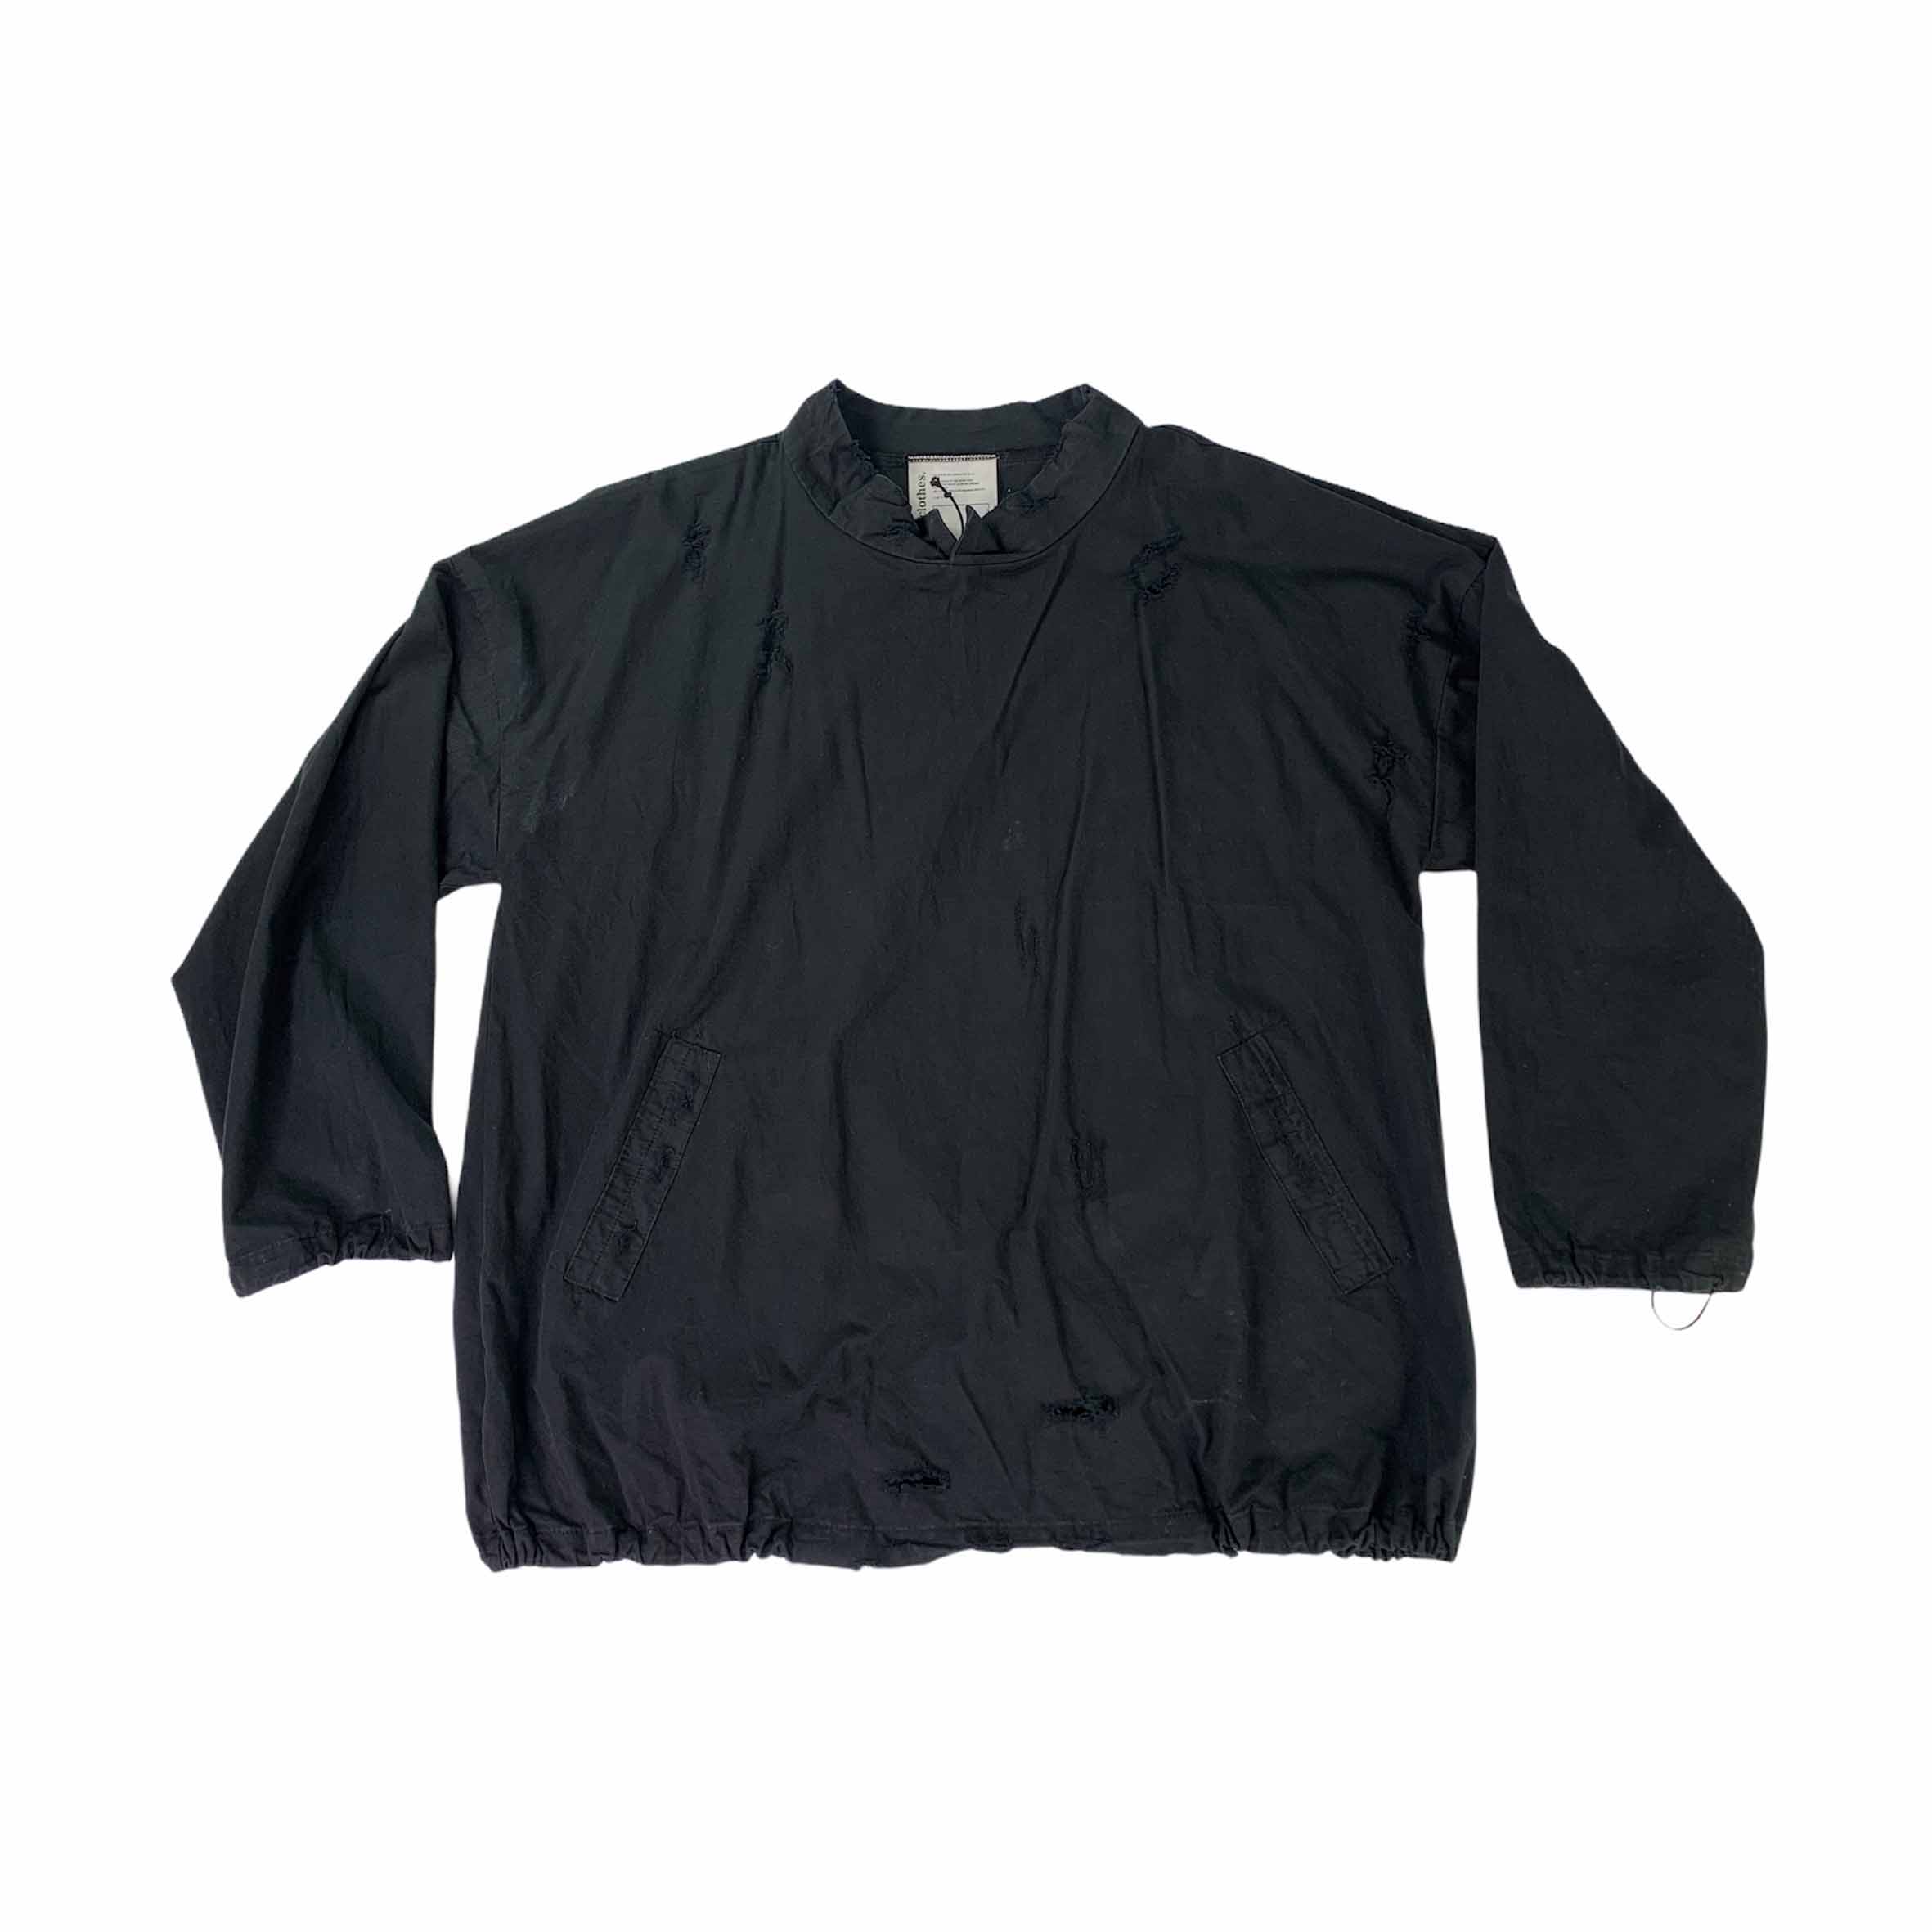 [Nondisclothes] Flip Longsleeve with Strings BK - Size Free